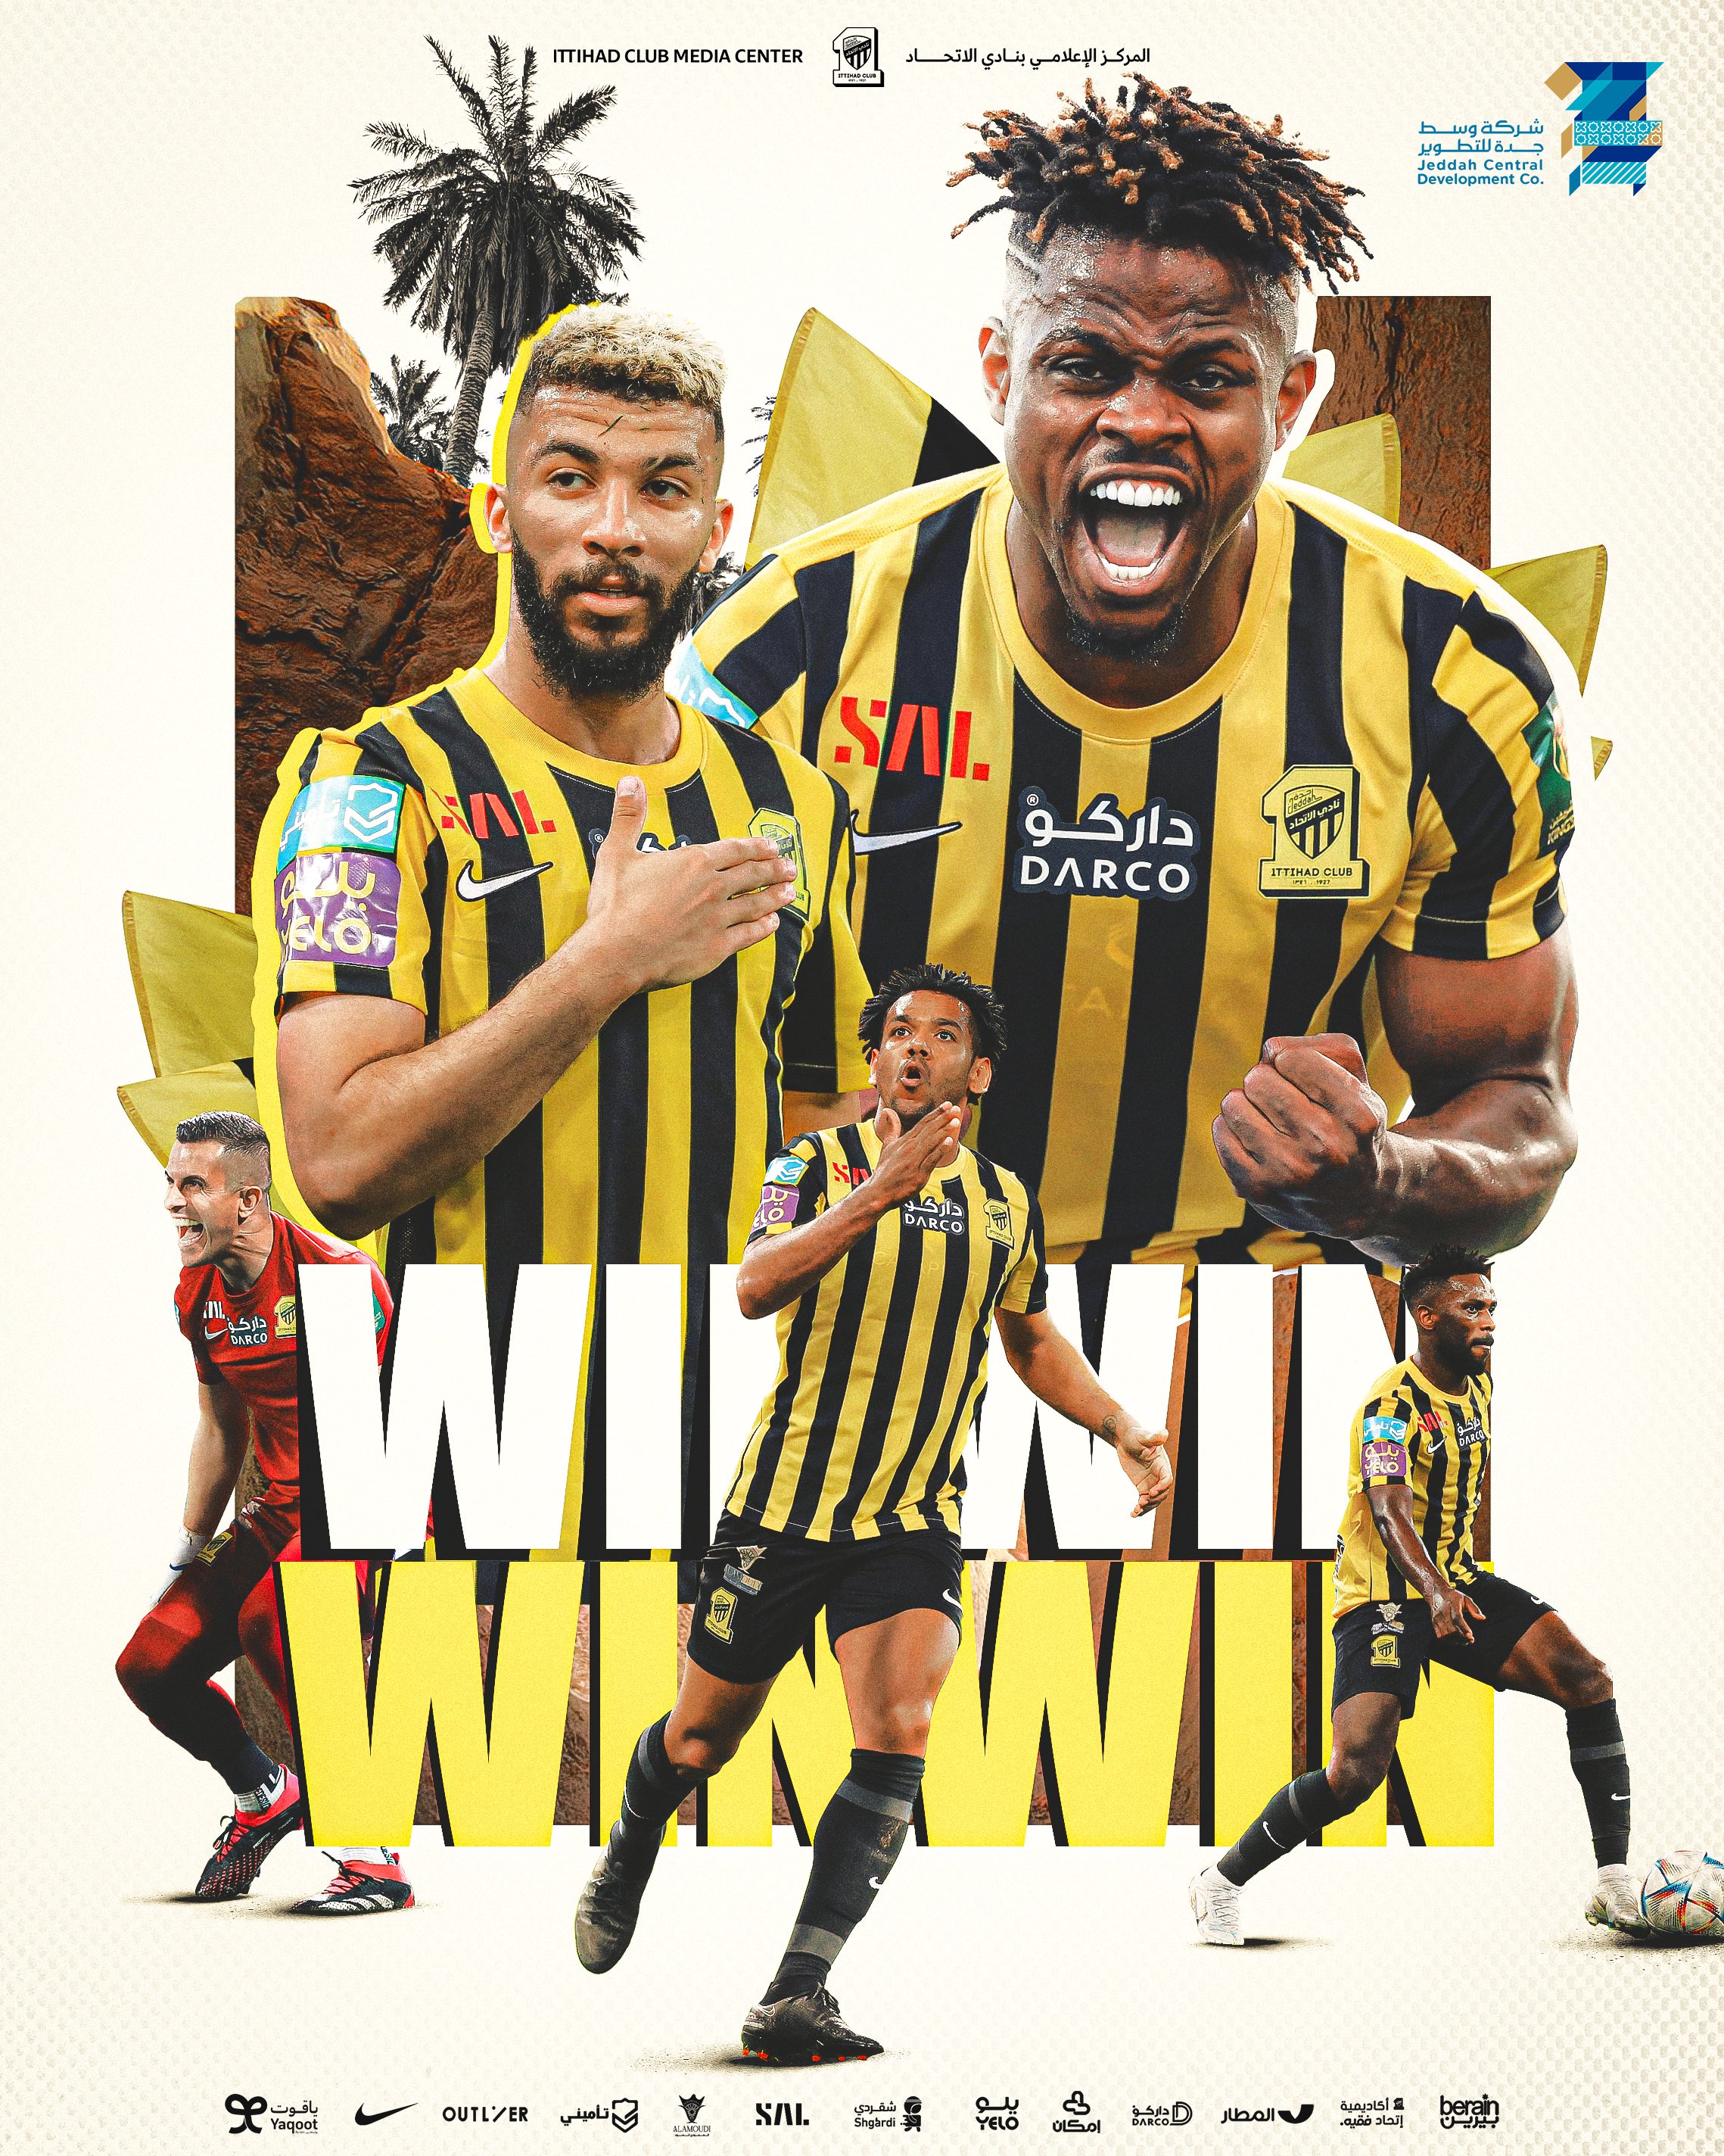 Ittihad Club on X: 🔥 The Al-Ittihad team has arrived to the stadium! 💪  With hearts full of excitement and jerseys ablaze, they're ready to conquer  the field and make their mark!